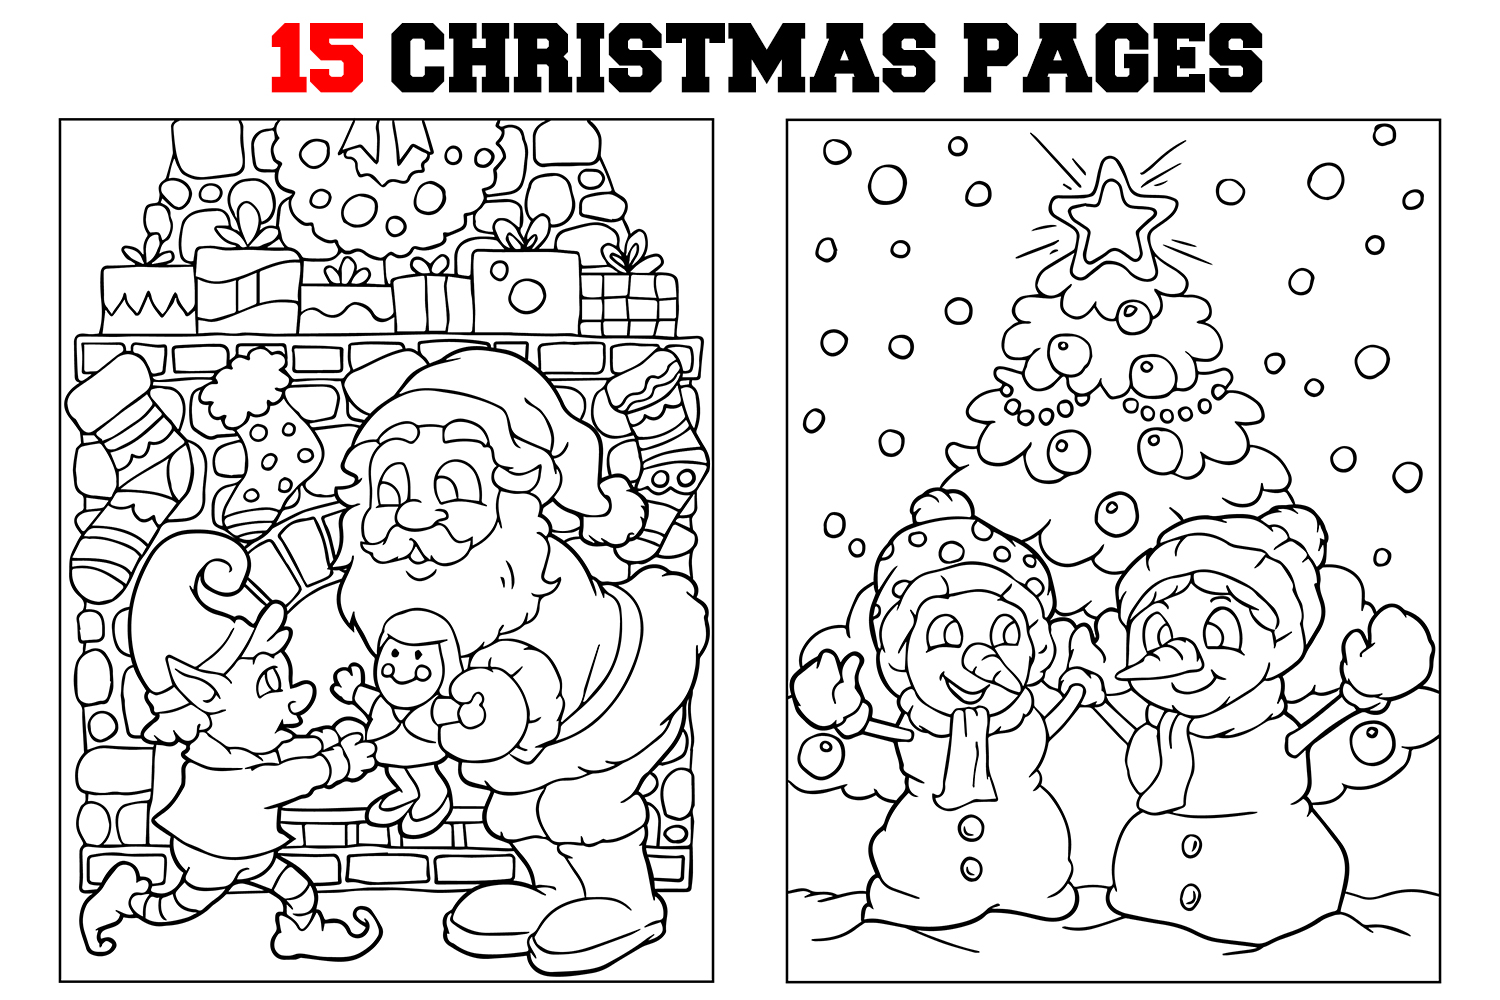 Download Coloring Pages For Kids - 15 Christmas Pages (304593 ...